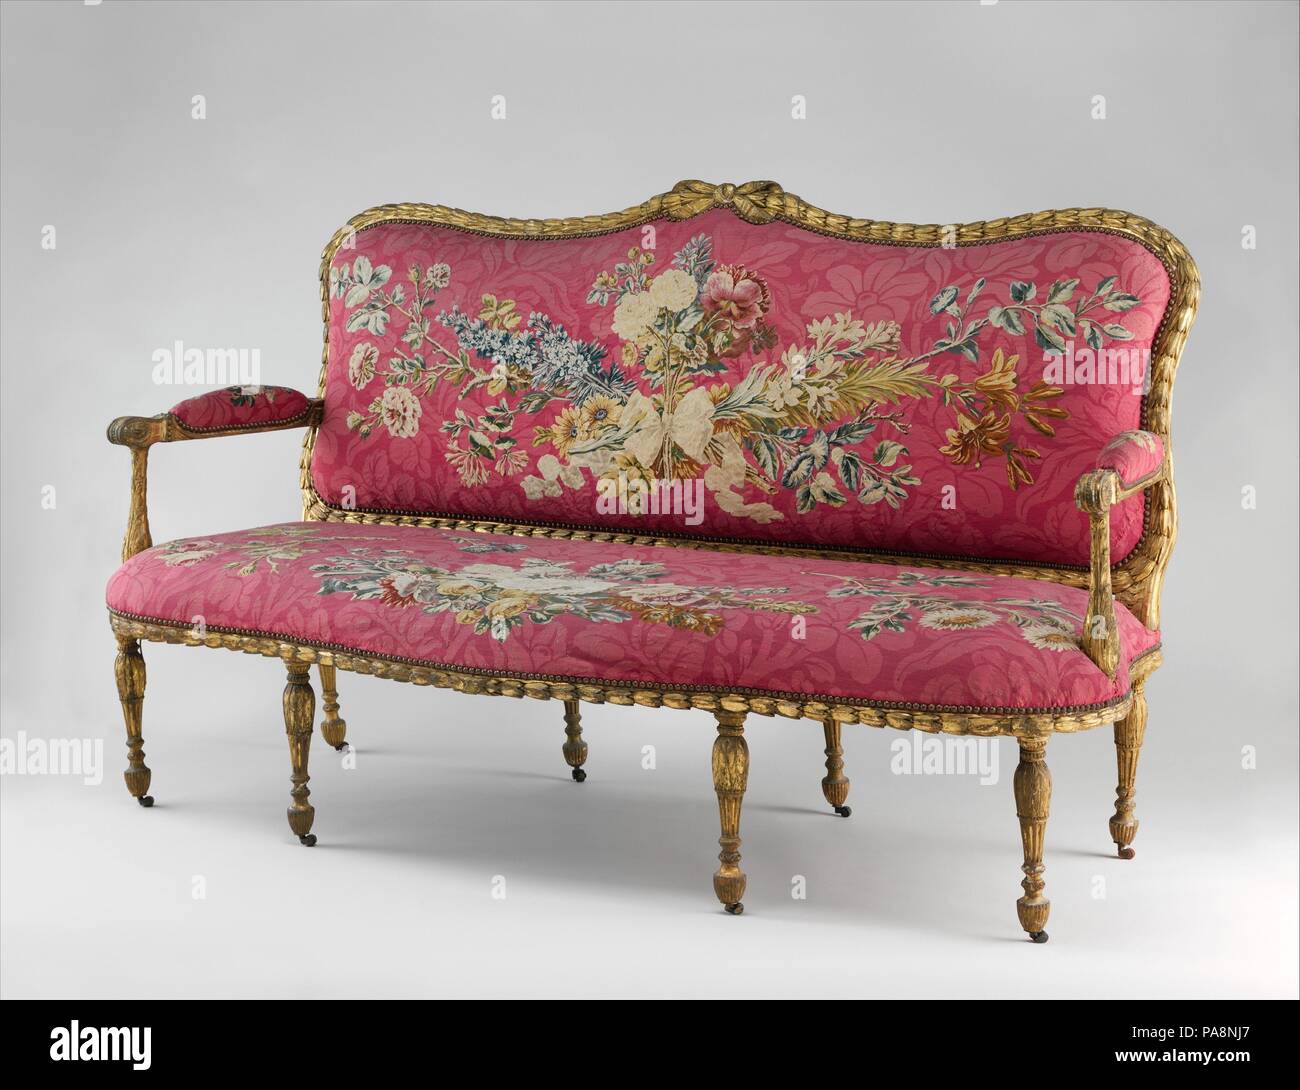 Settee (one of a pair). Culture: British and French. Designer: Tapestry designed by Maurice Jacques (French, 1712-1784). Dimensions: 44 × 75 × 32 1/2 in. (111.8 × 190.5 × 82.6 cm). Factory: Tapestry woven at Manufacture Nationale des Gobelins (French, established 1662). Maker: Workshop of Jacques Neilson (French, 1714-1788); John Mayhew (British, 1736-1811); and William Ince (British, active ca. 1758/59-1794, died 1804). Patron: Commissioned for George William Coventry, 6th earl of Coventry (Croome Court, Worcestershire, England). Date: 1769-71.  This settee and its mate (58.75.22) were made f Stock Photo